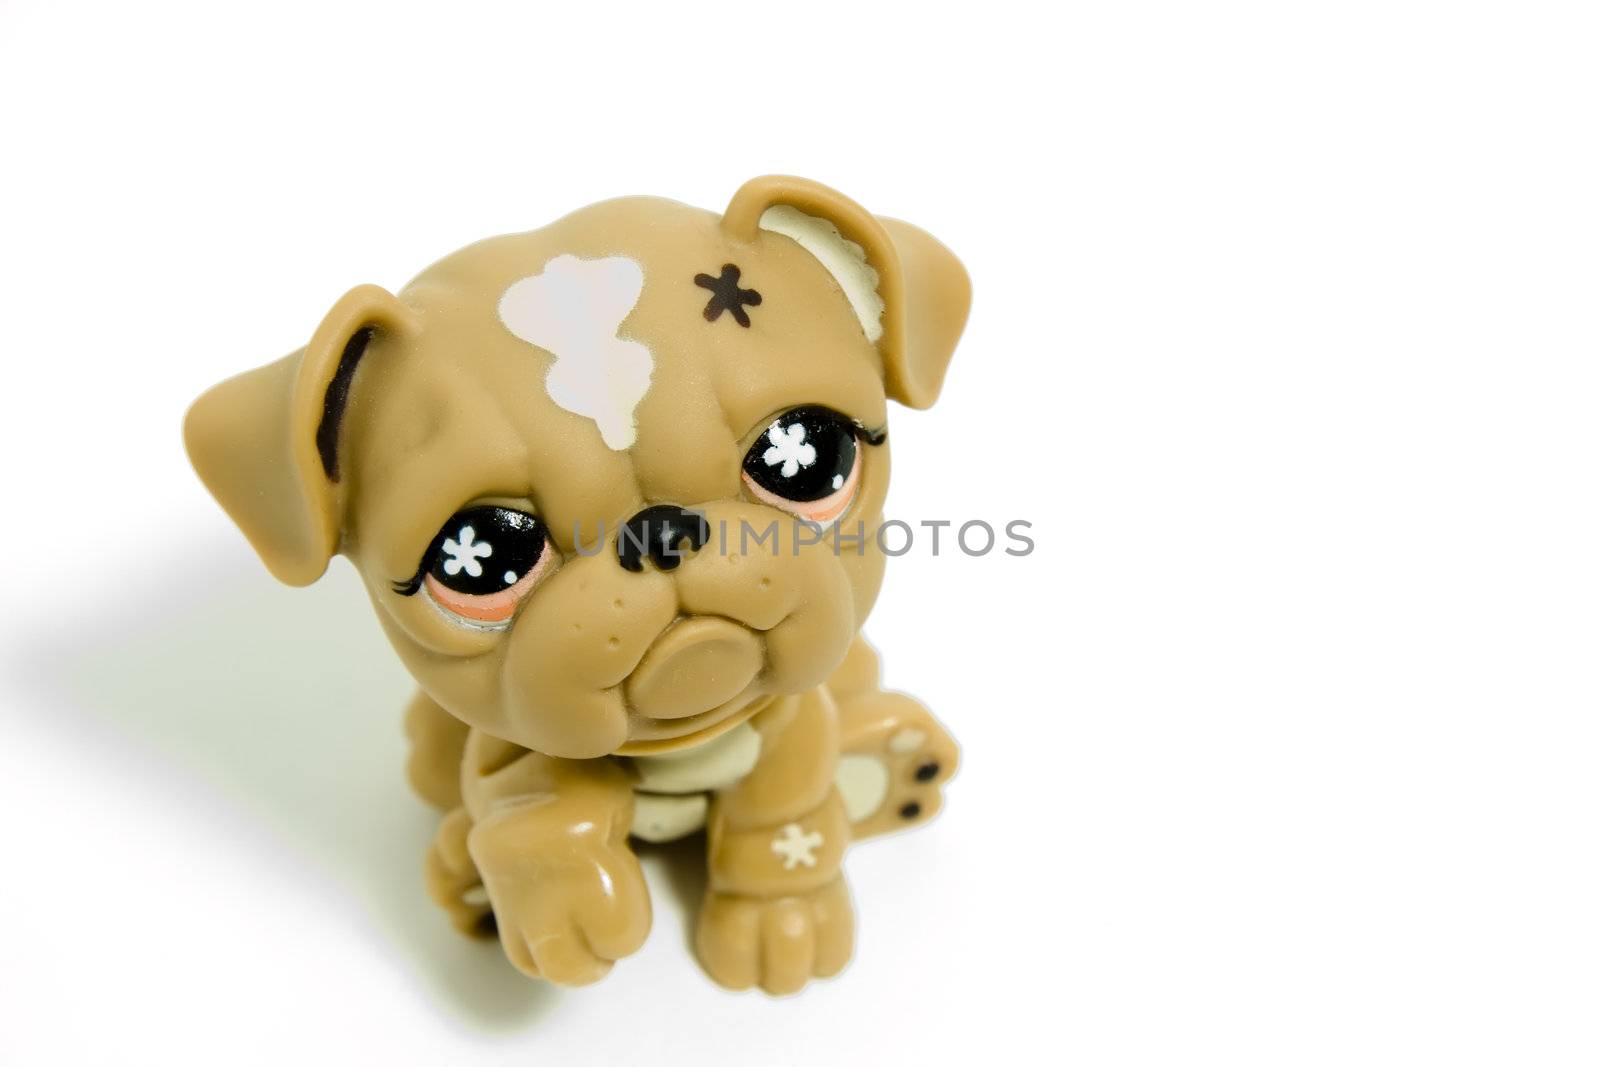 puppy toy by nubephoto